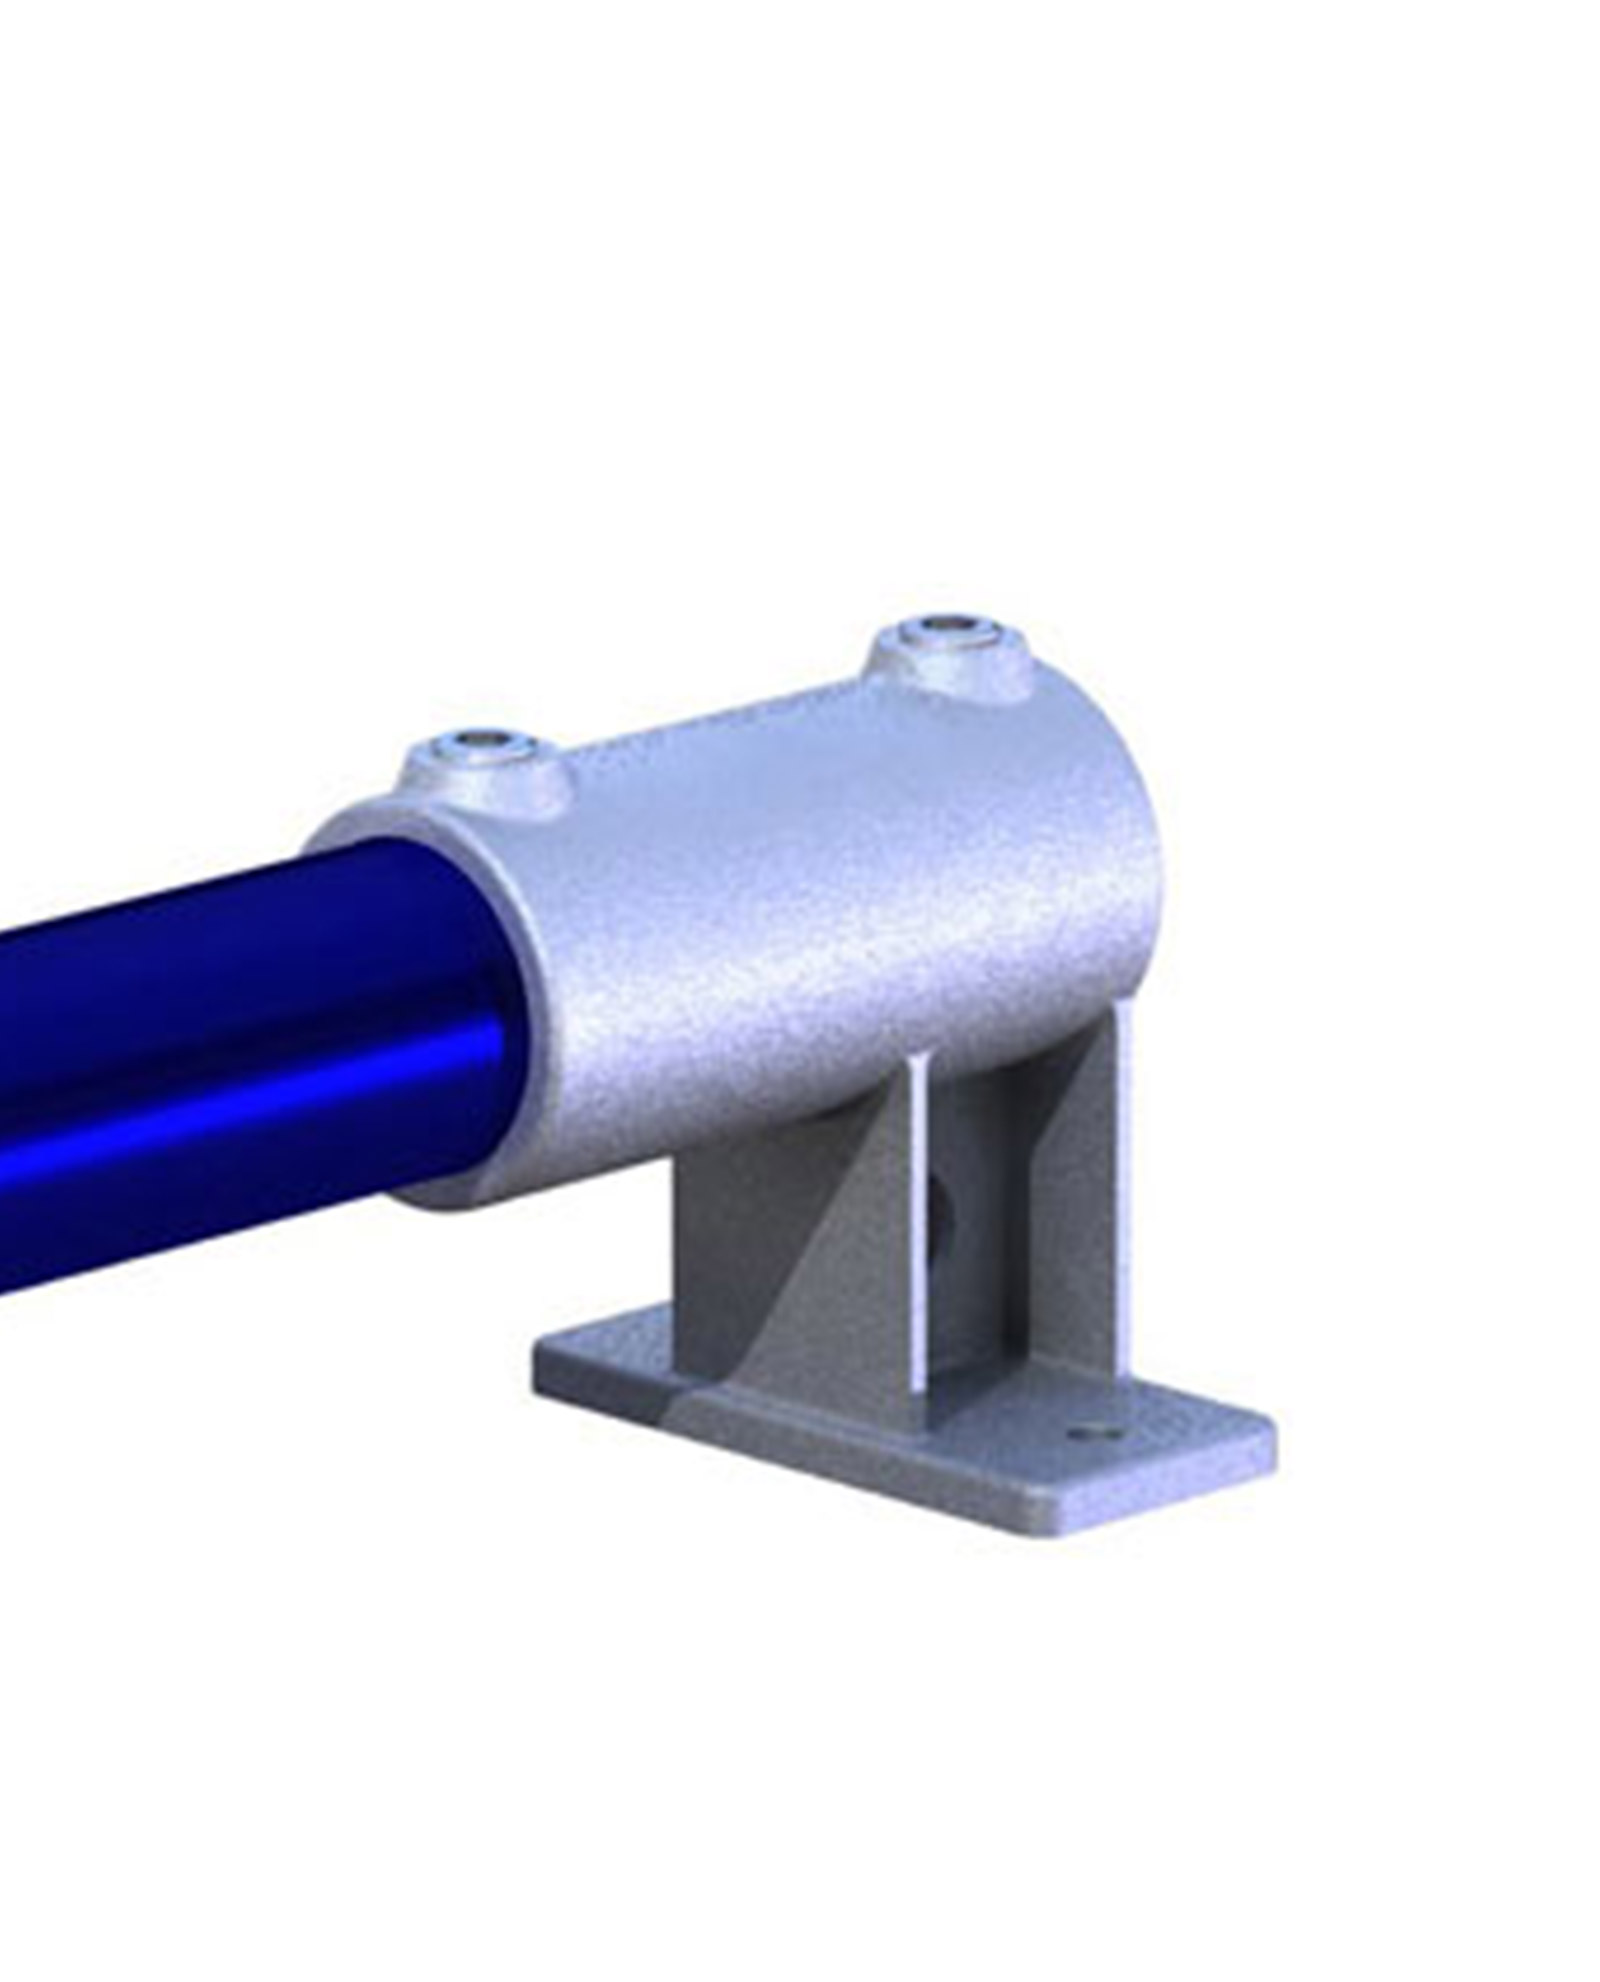 Doughty pipeclamp Railing Side Support Horizontal Base